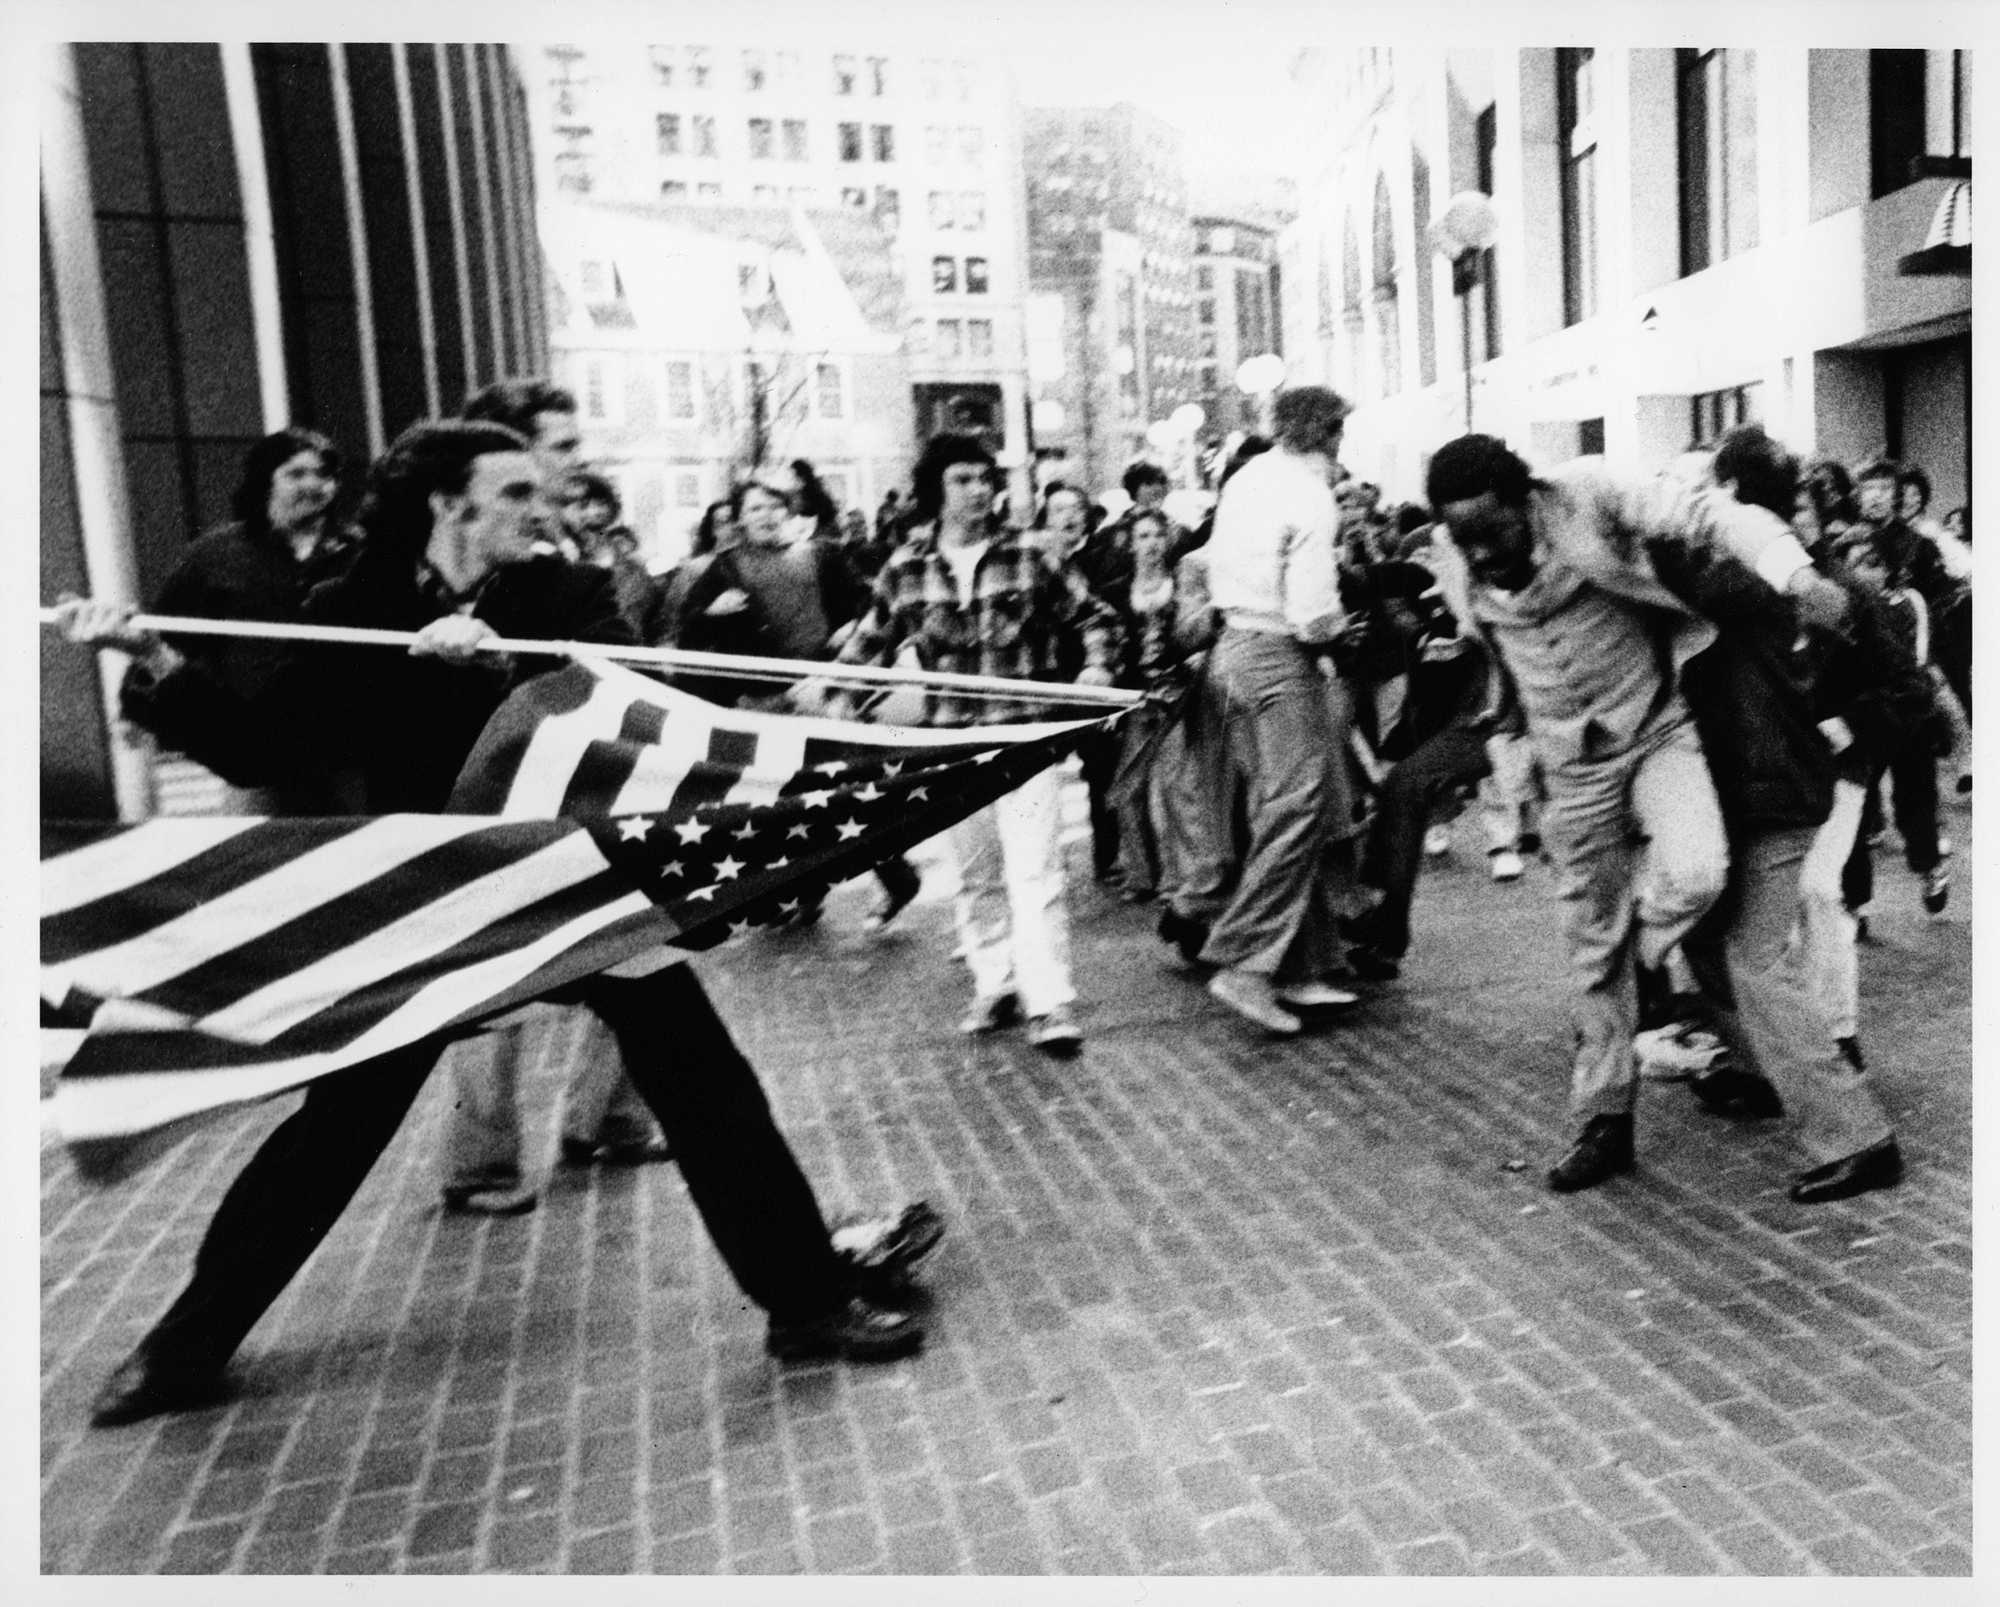 At a Boston rally against forced school busing, white teenager Joseph Rakes brandished an American flag at Ted Landsmark on April 5, 1976. The photo, which would come to be known as "The Soiling of Old Glory," rocketed around the world.